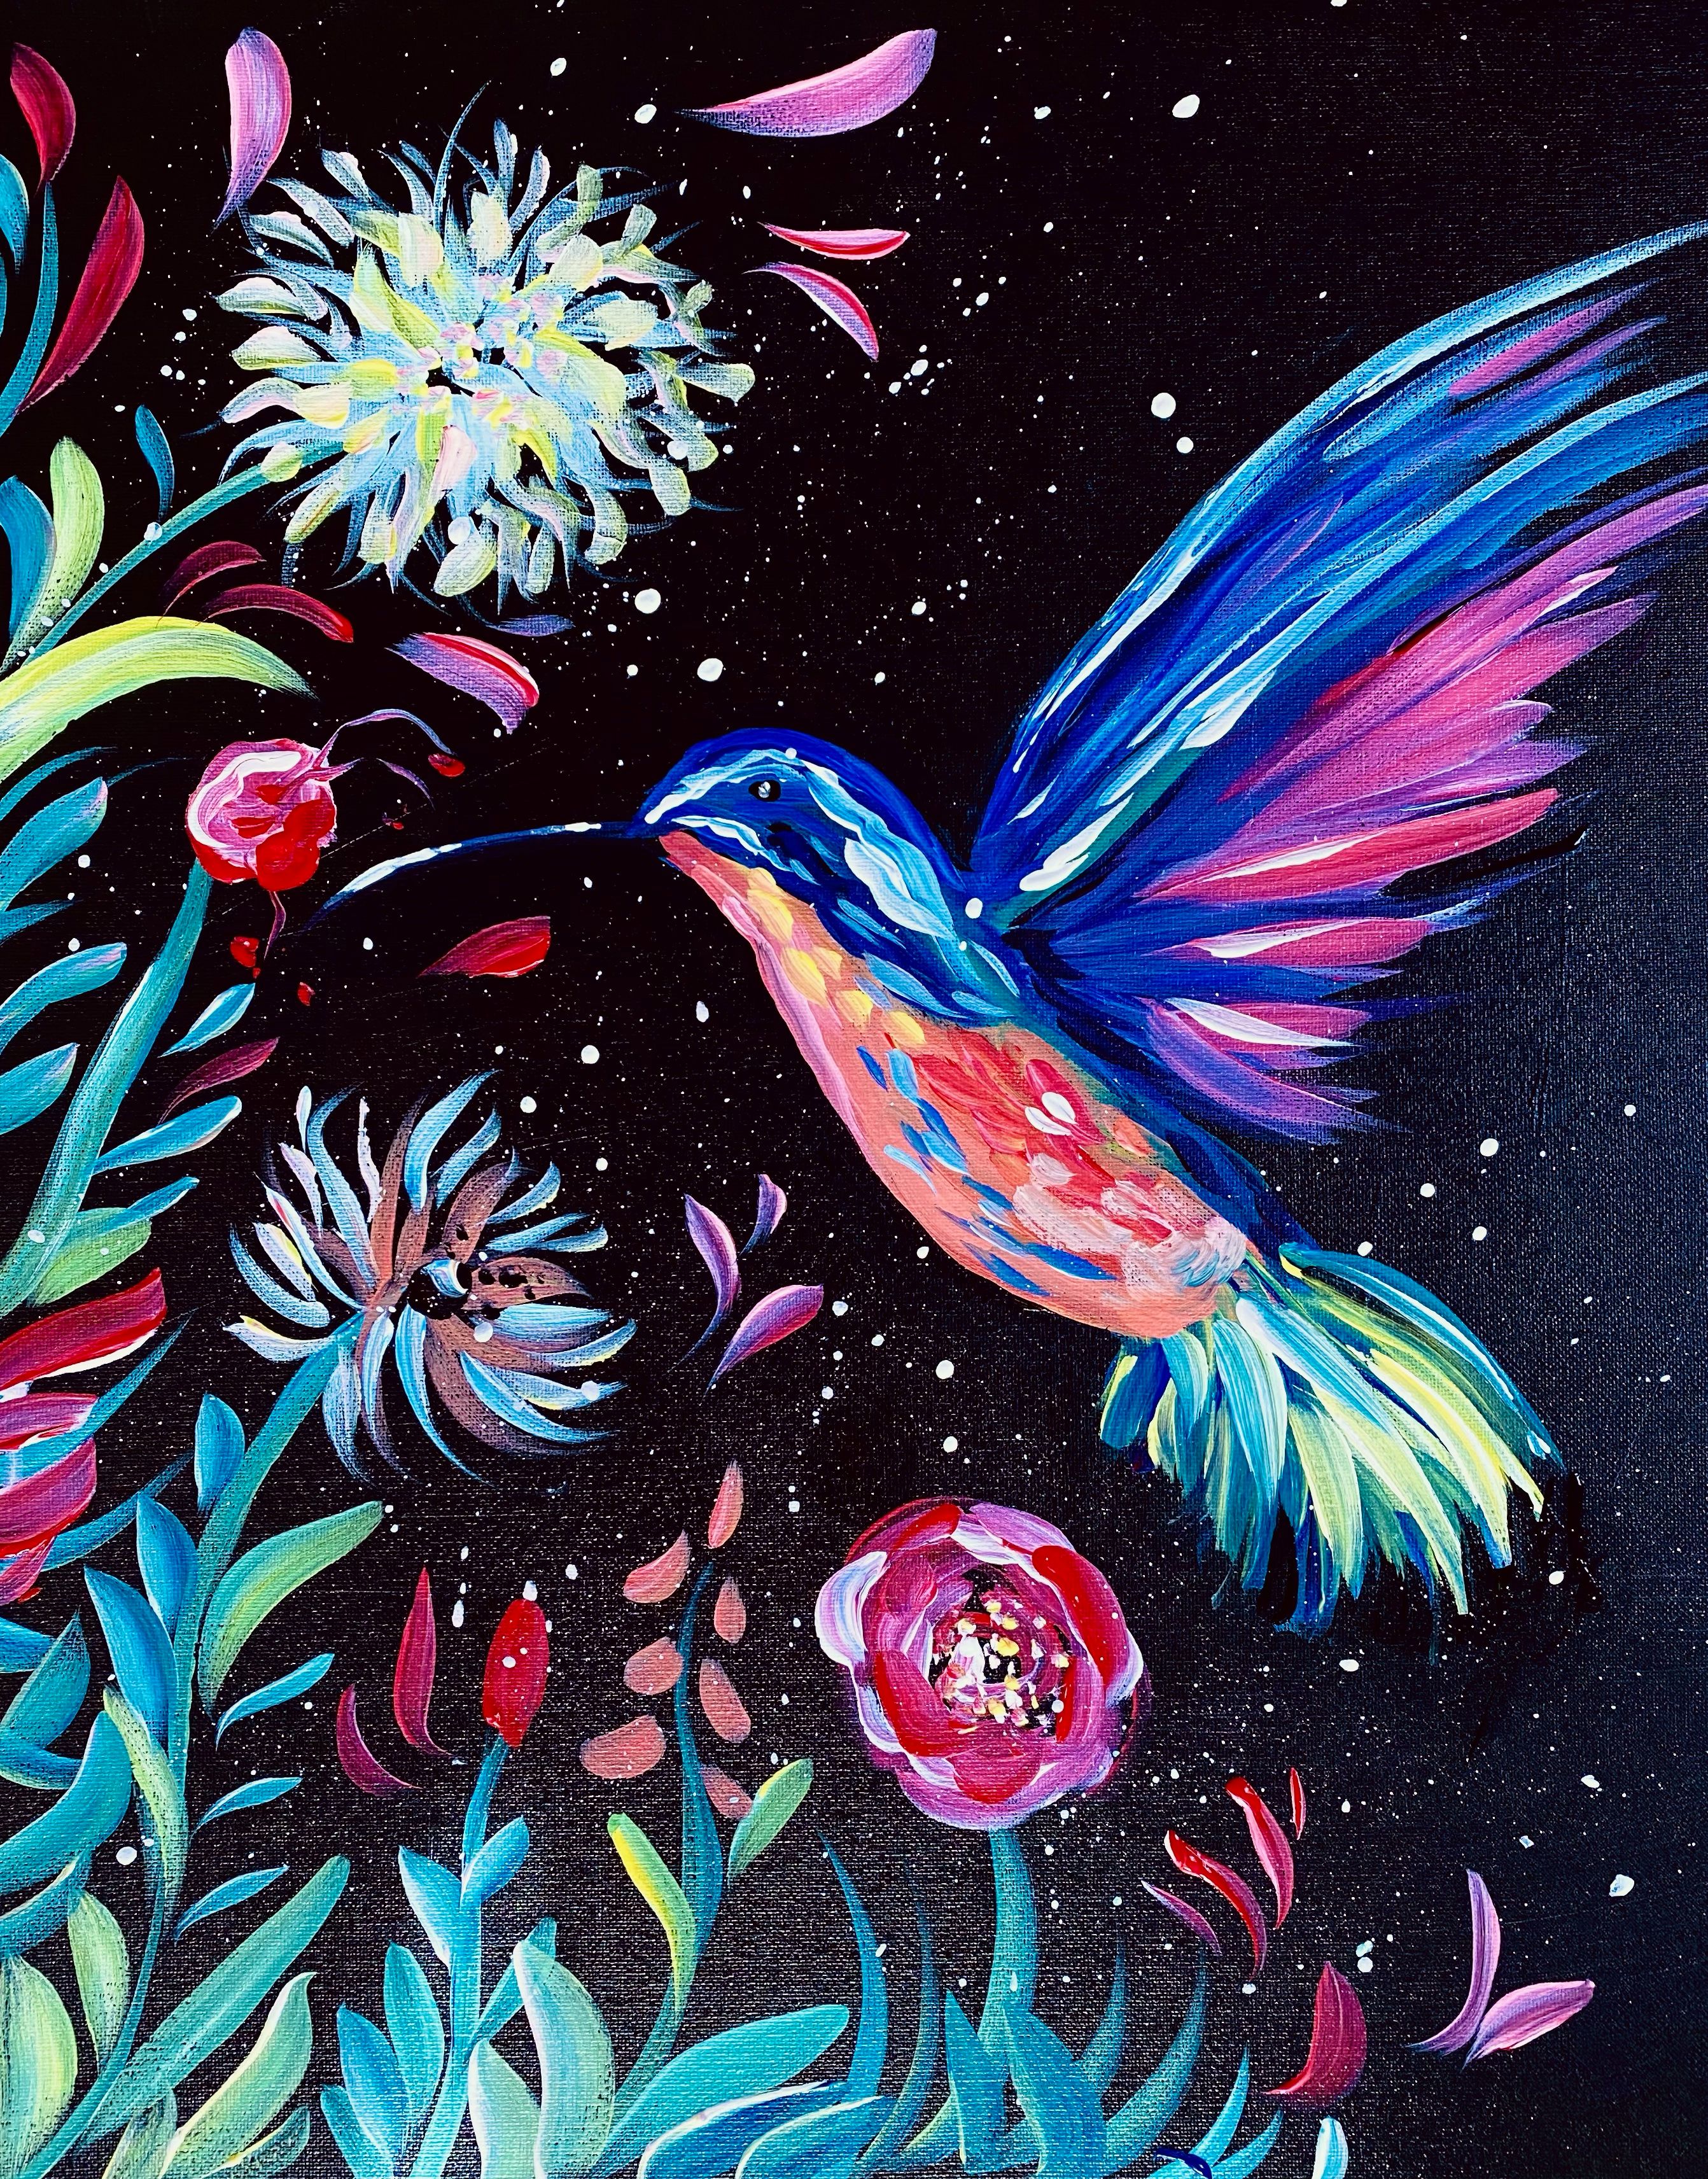 A Hummingbird Night  experience project by Yaymaker